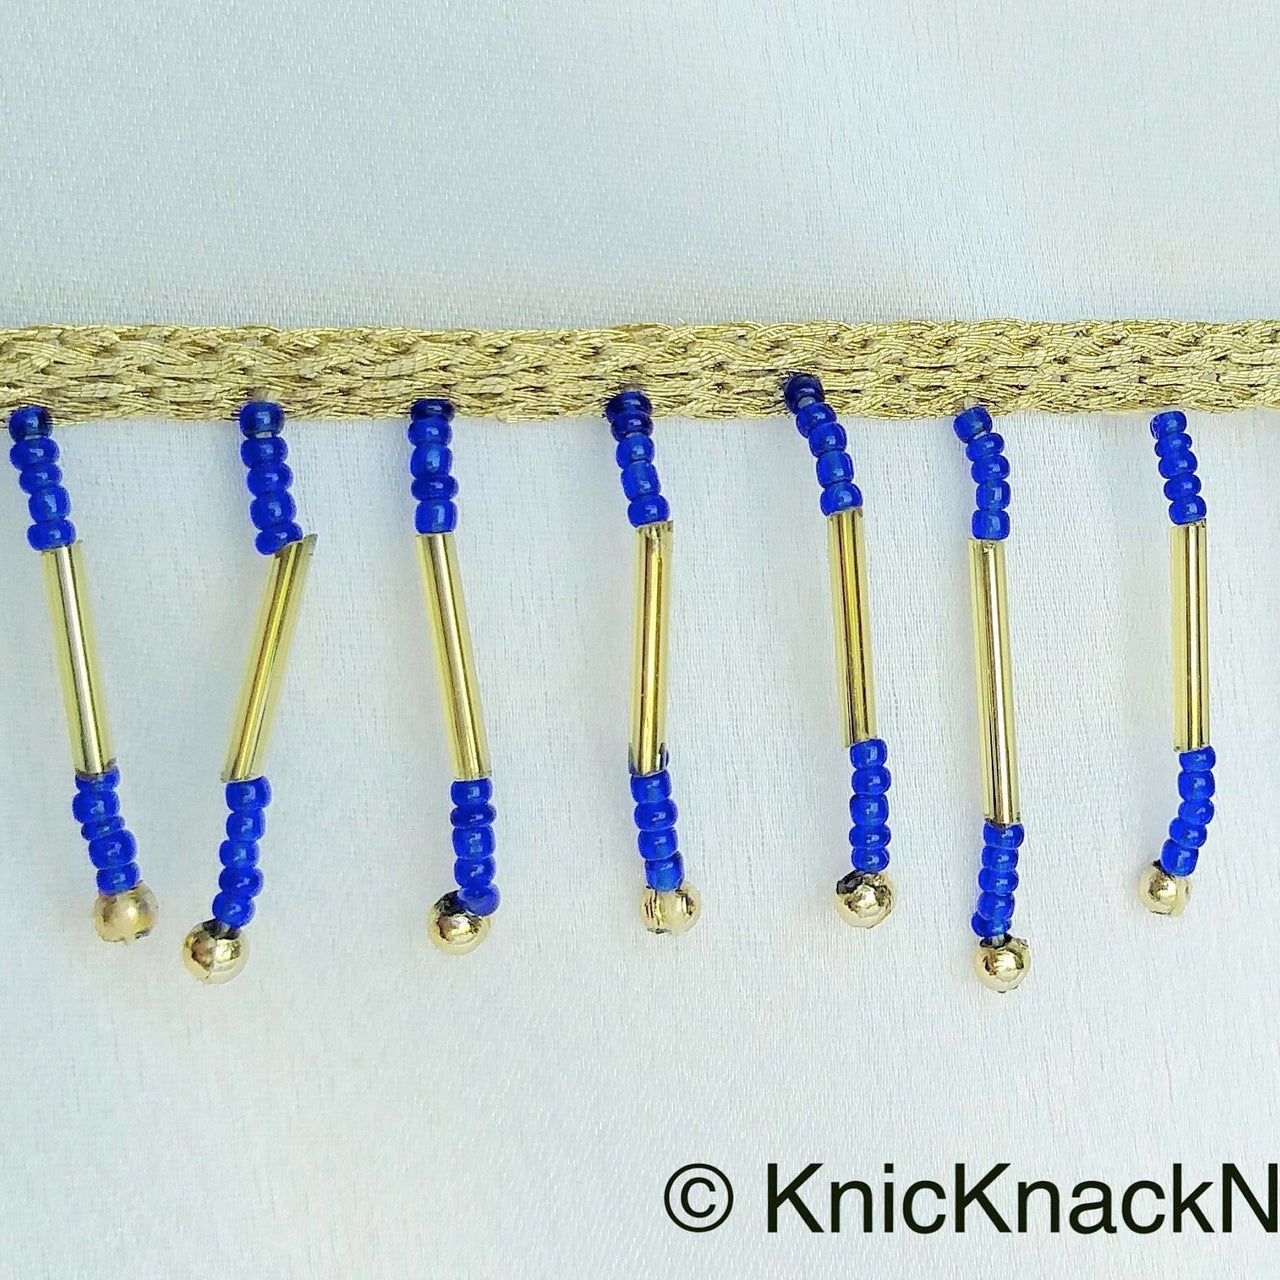 Gold Fringe Trim With Gold and Blue Beads Dangles, Beaded Tassels, Approx. 35mm wide